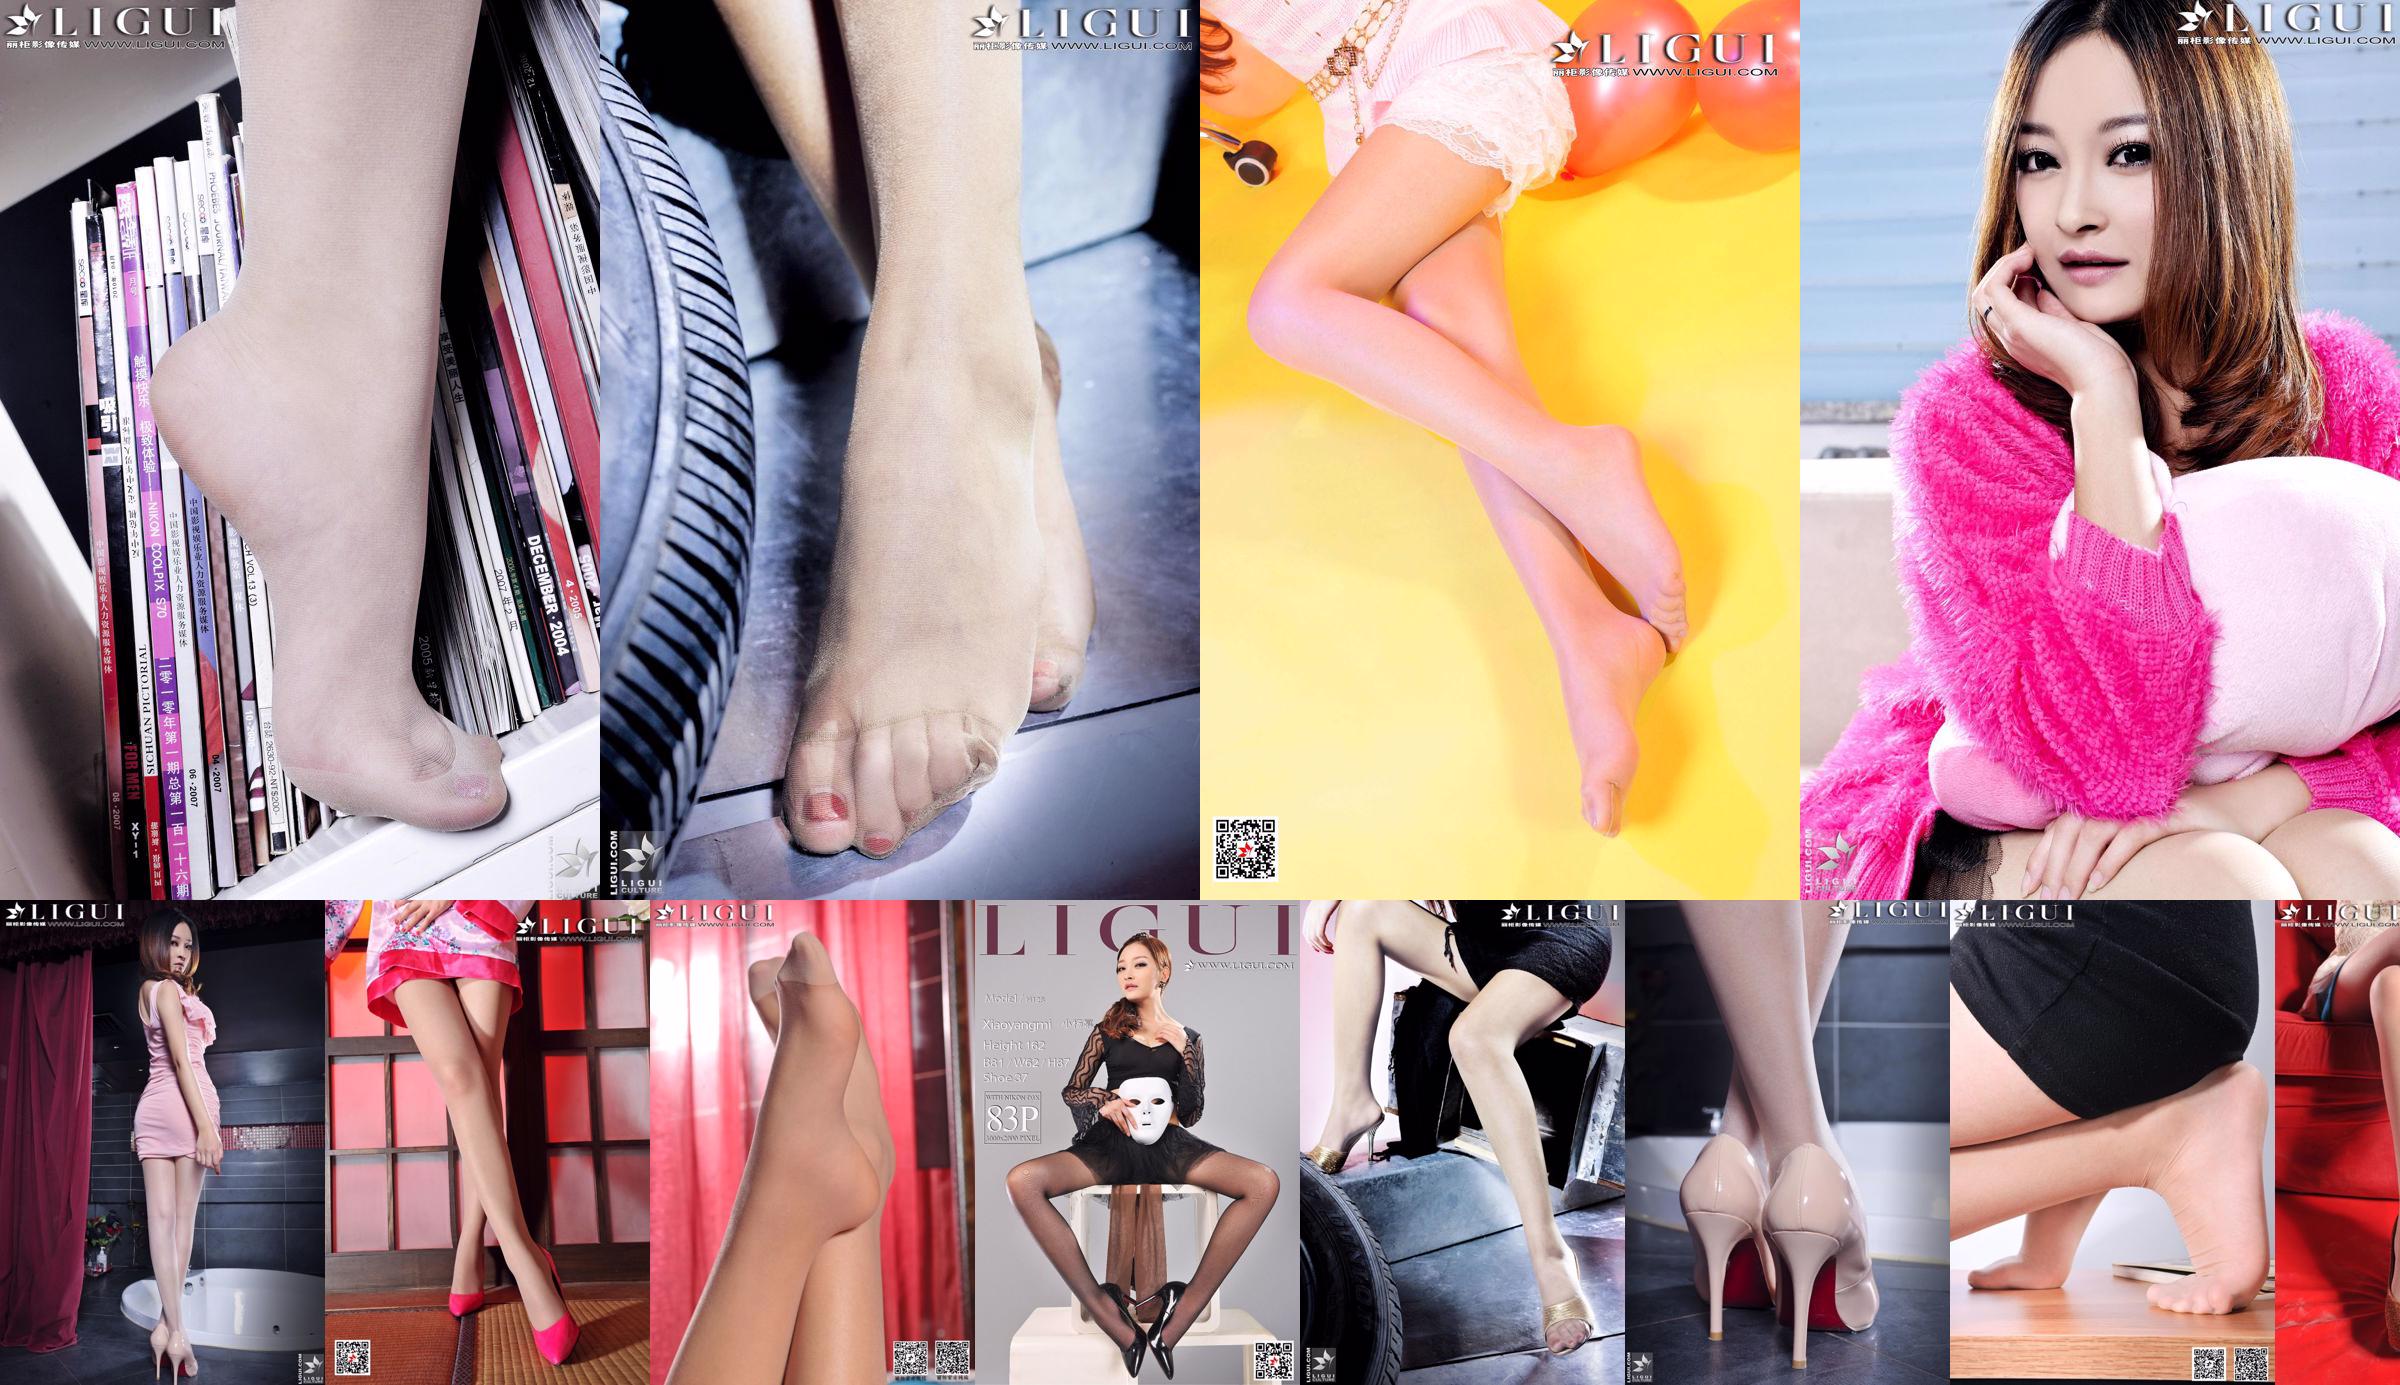 Model Xiao Yang Mi's "Bathroom Wet Feet" Complete Works [Li Cabinet Expensive Feet] Beautiful legs and silk feet photo pictures No.b9d26b Page 1